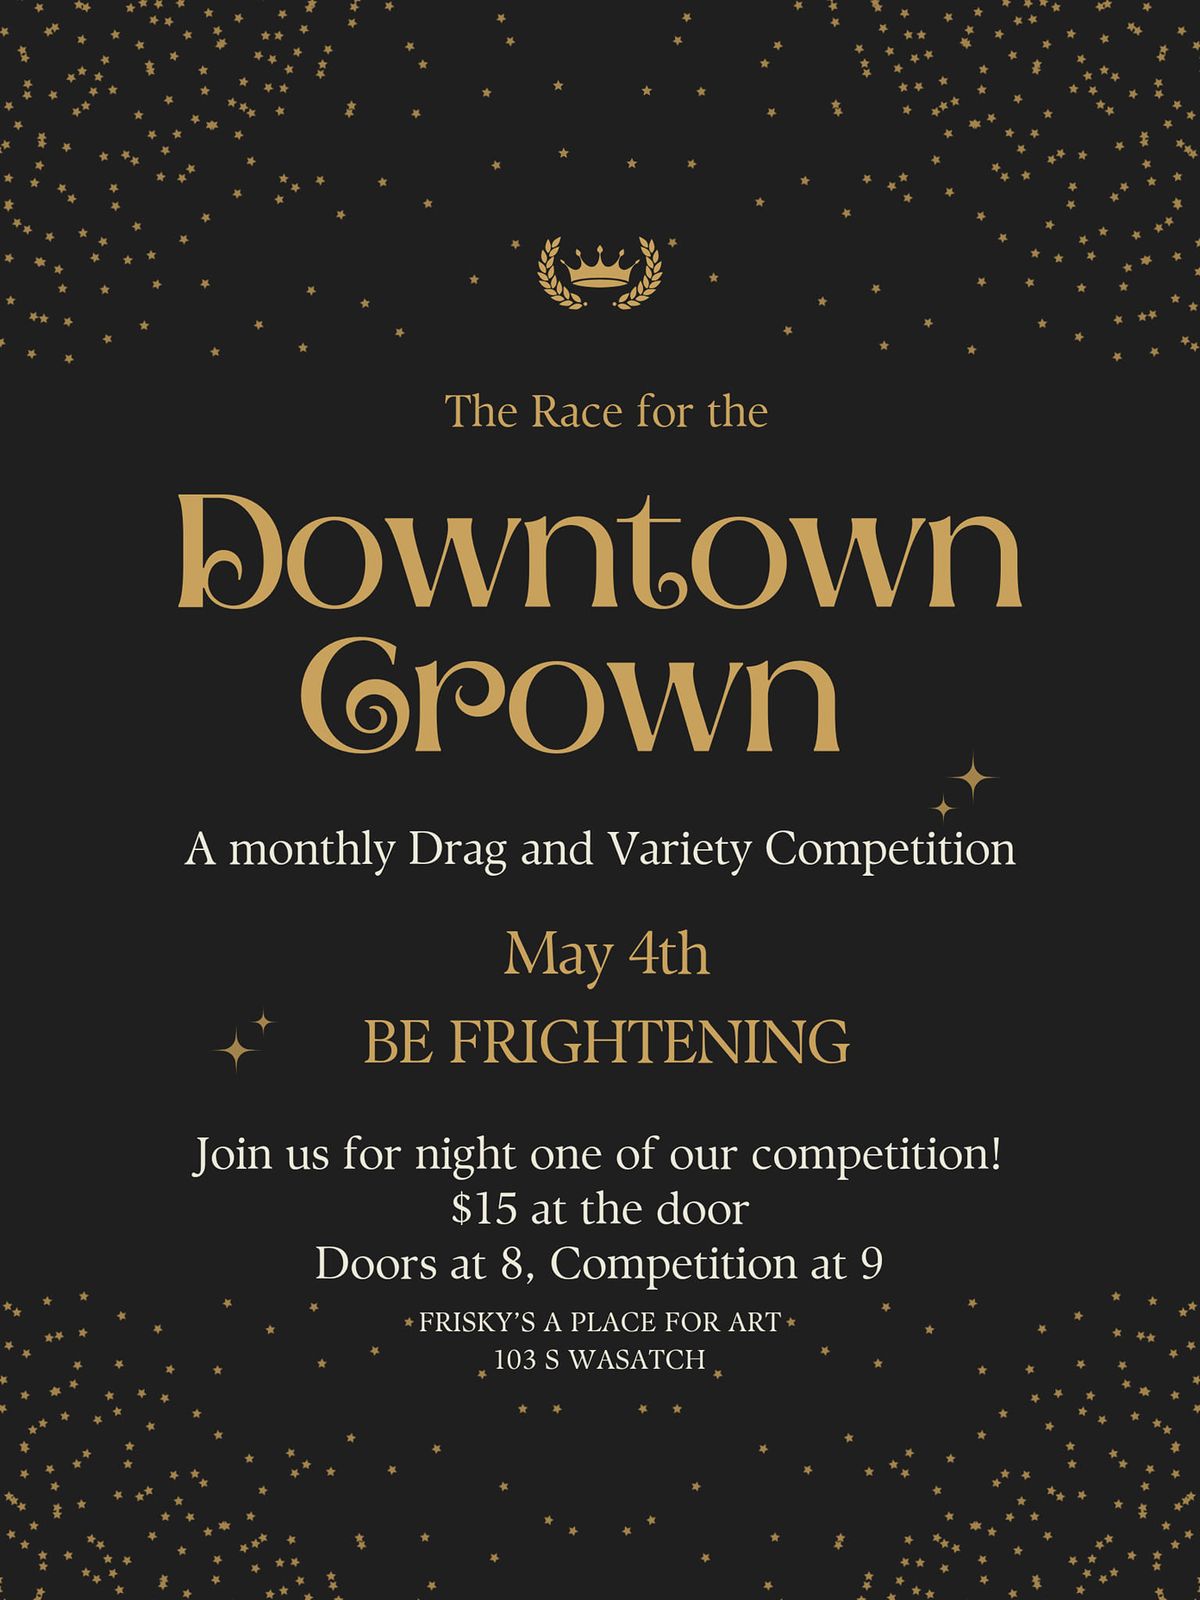 Downtown Crown: Be Frightening!